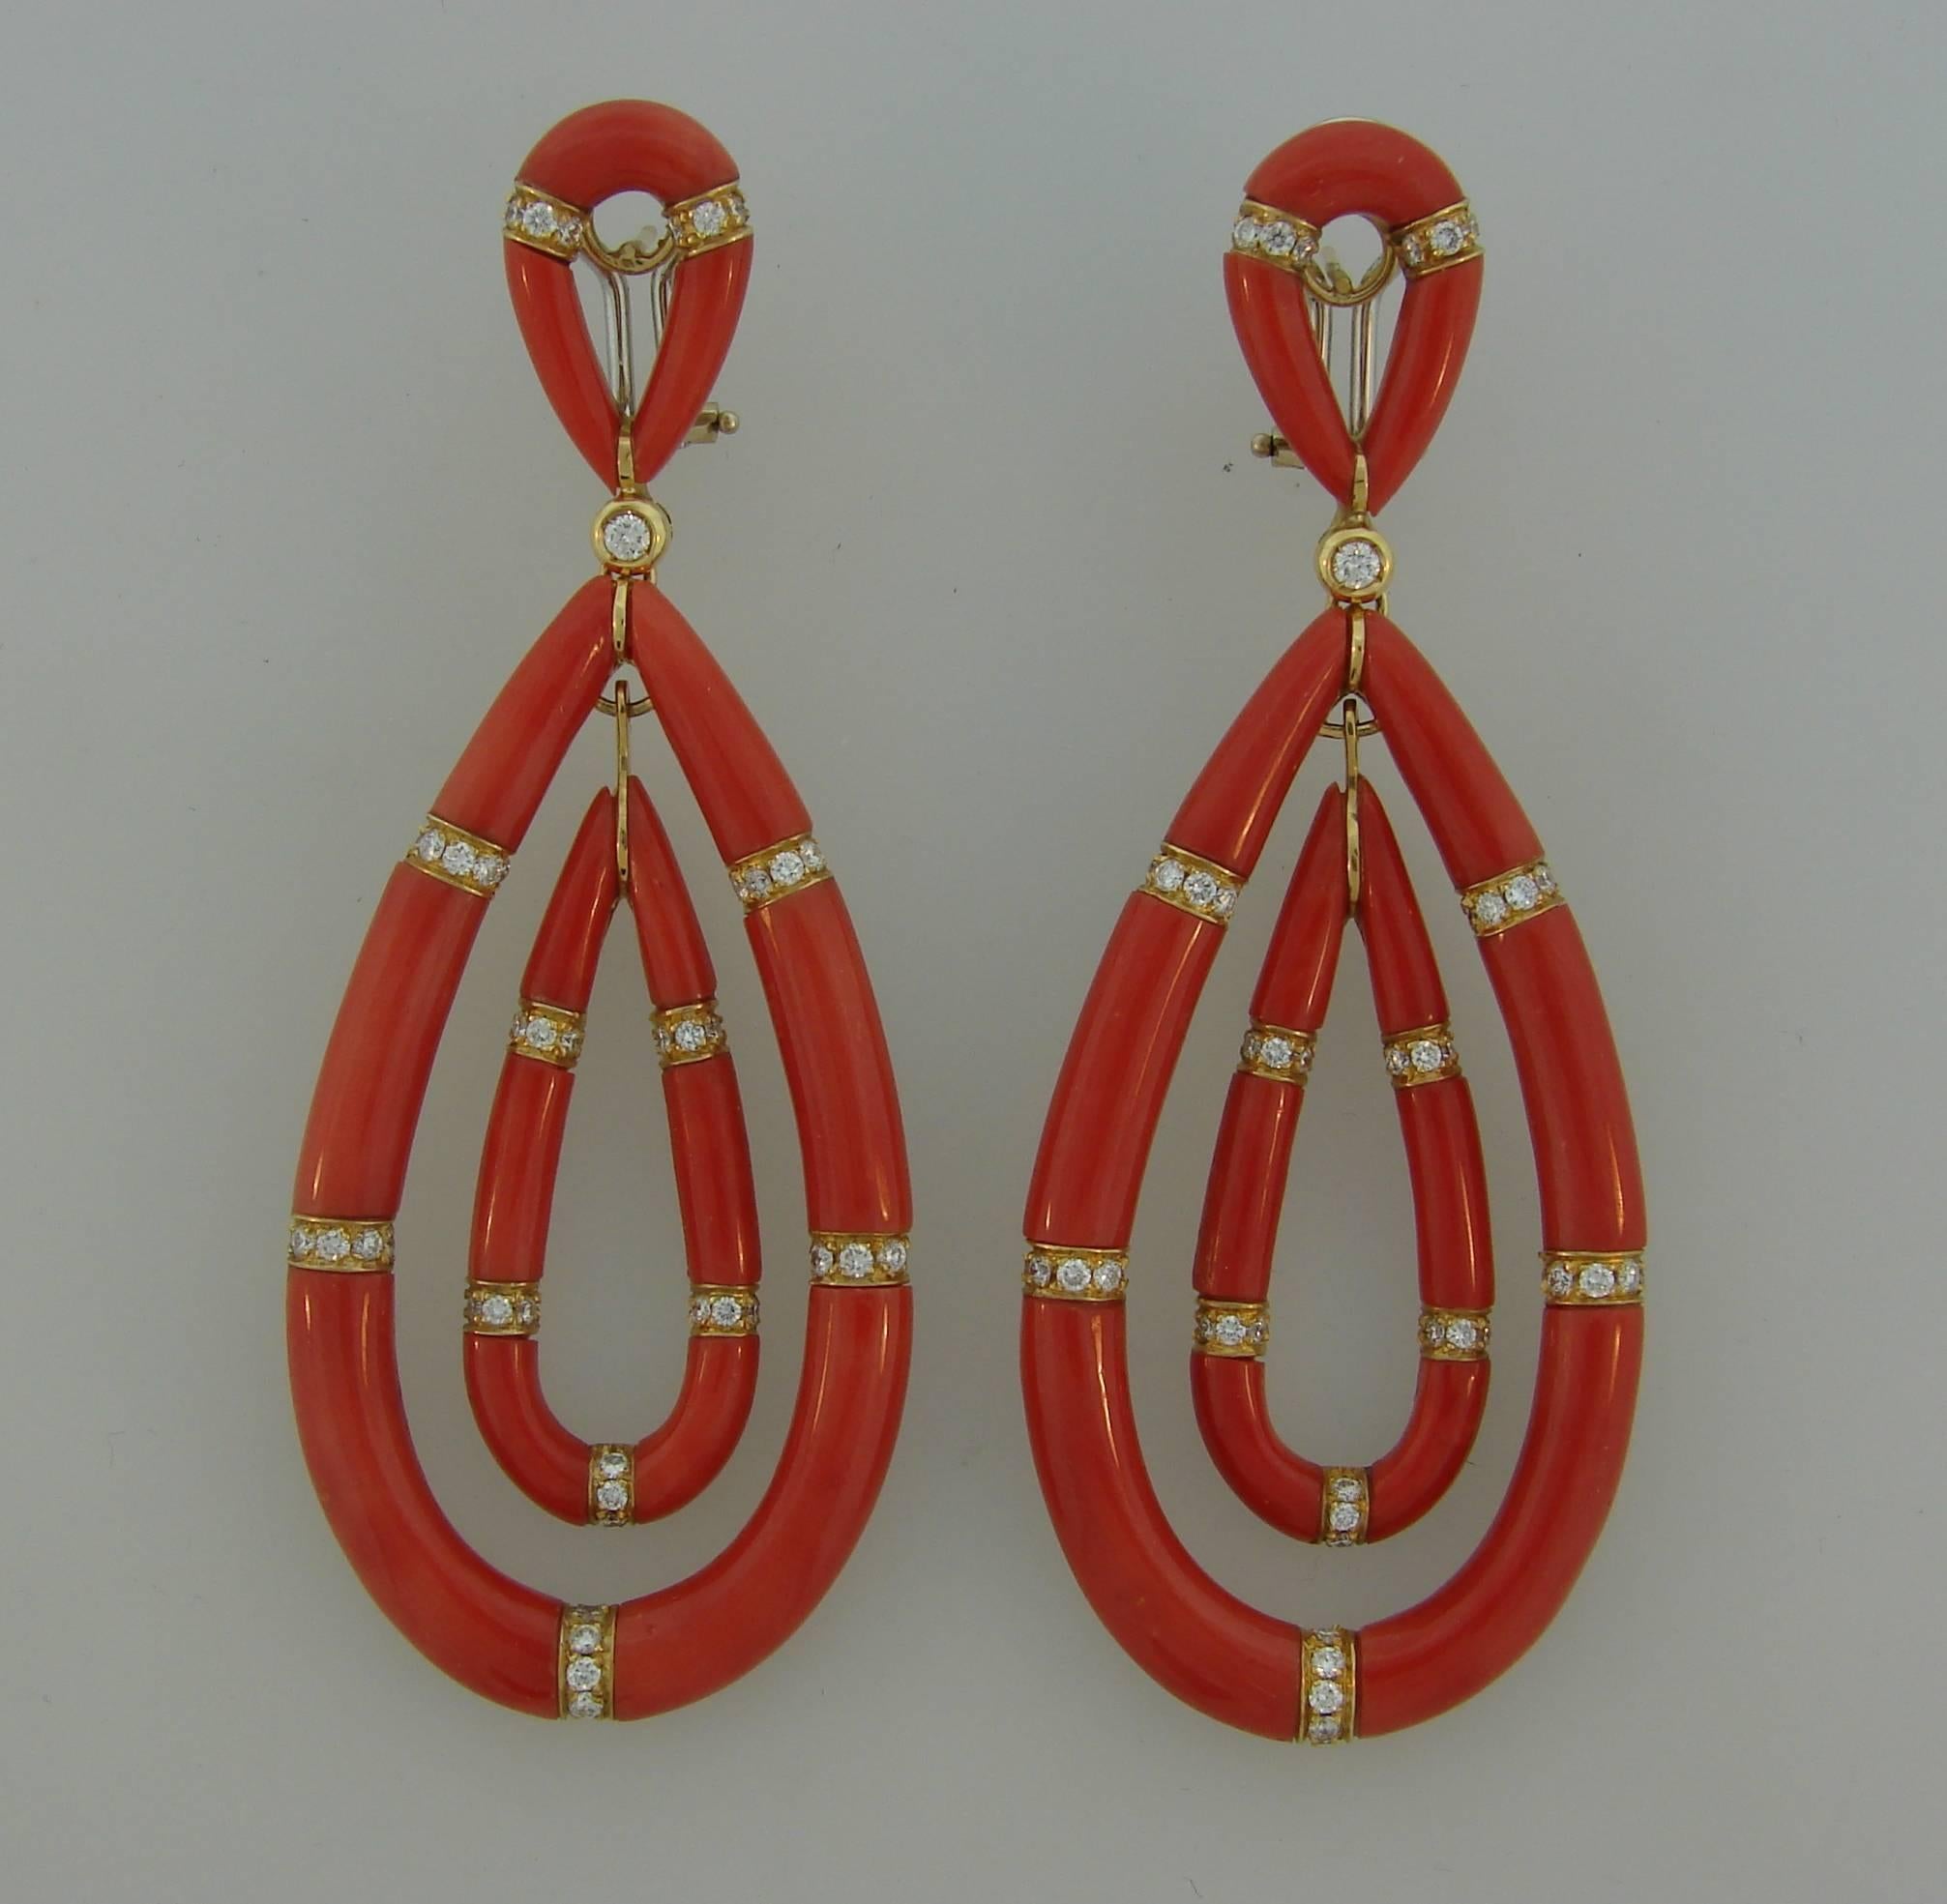 Gorgeous Mediterranean coral earrings created in Italy in the 1970's. Beautiful intense red sprinkled with diamond sparkle, elongated elegant shape will accentuate your refined taste and femininity. The earrings are a great addition to your jewelry